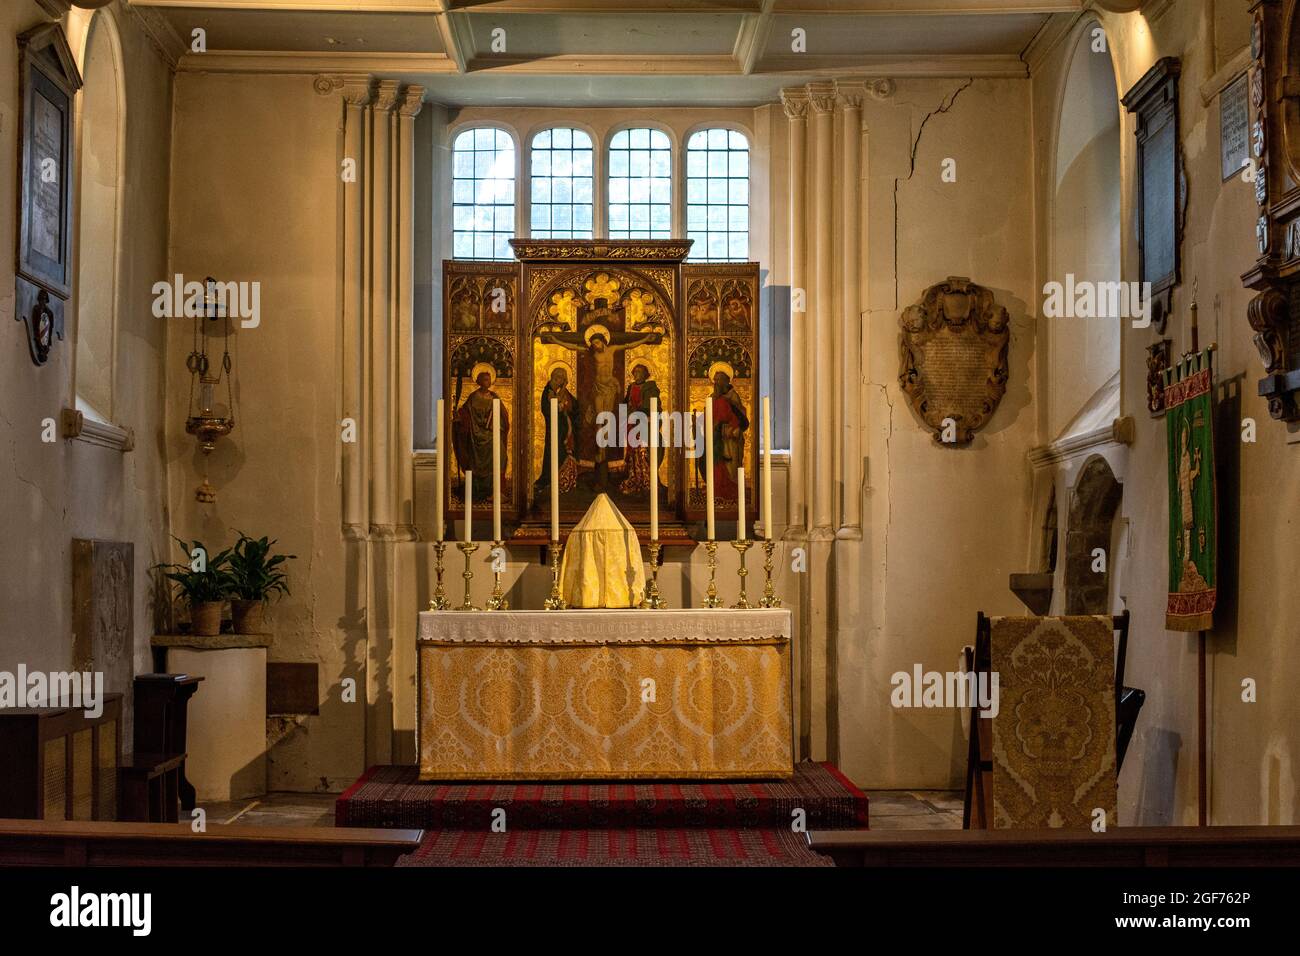 LONDON SOMERS TOWN SAINT PANCRAS OLD CHURCH INTERIOR VIEW OF CHANCEL AND ALTAR Stock Photo